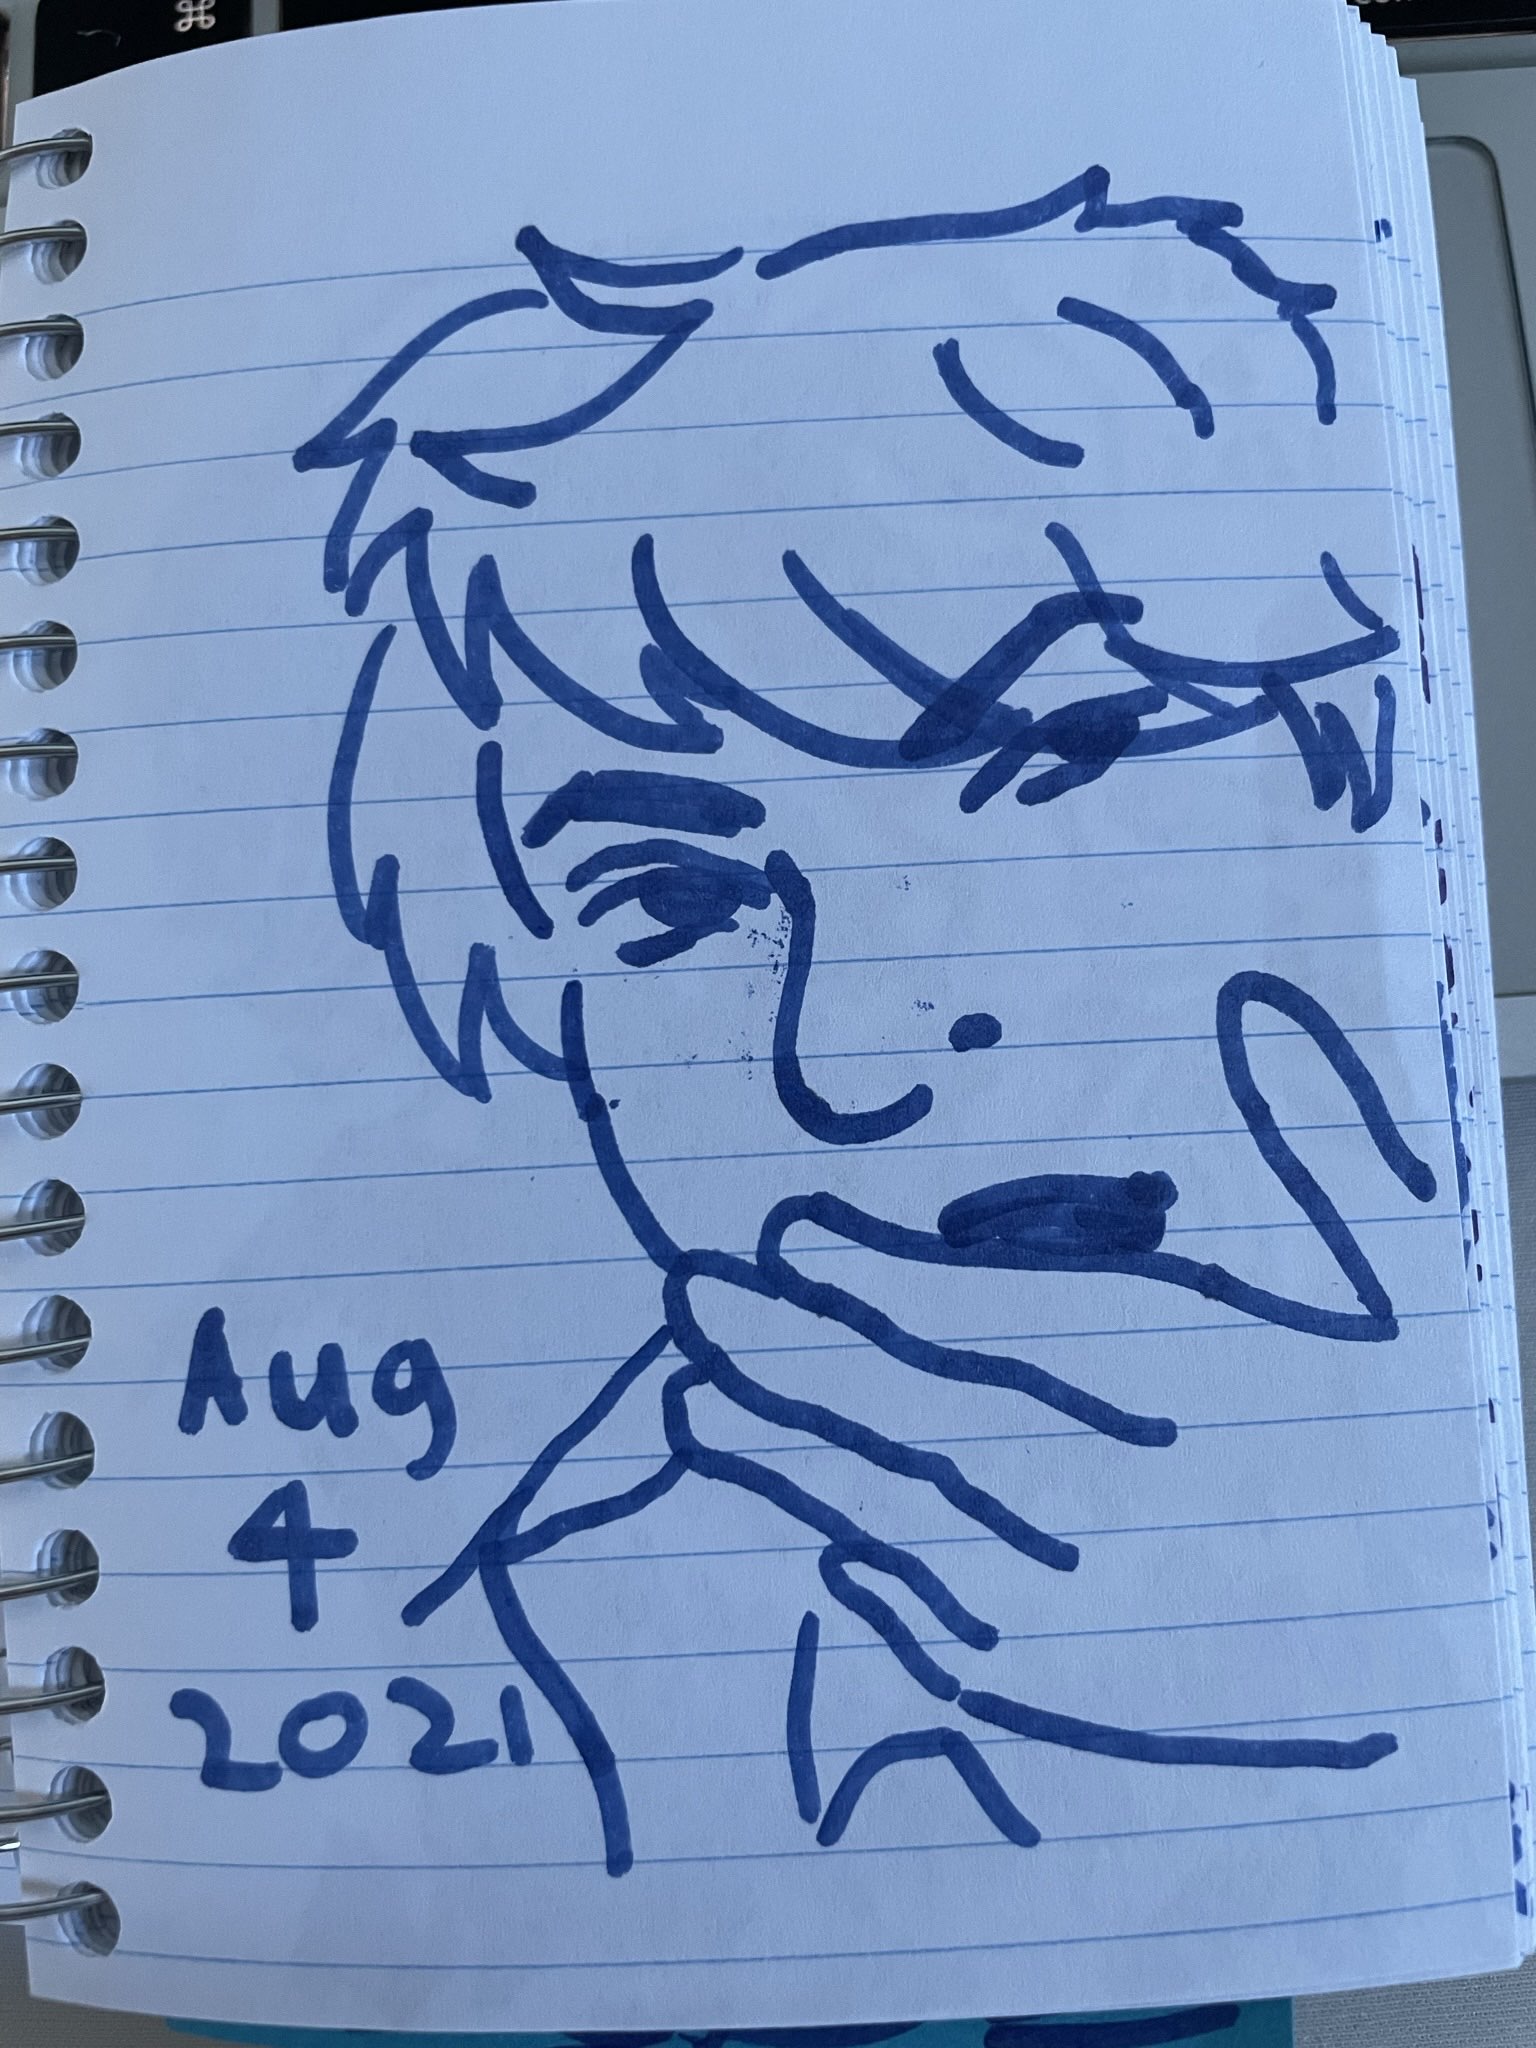 a drawing of me from aug 4 2021, I have very short fluffy hair